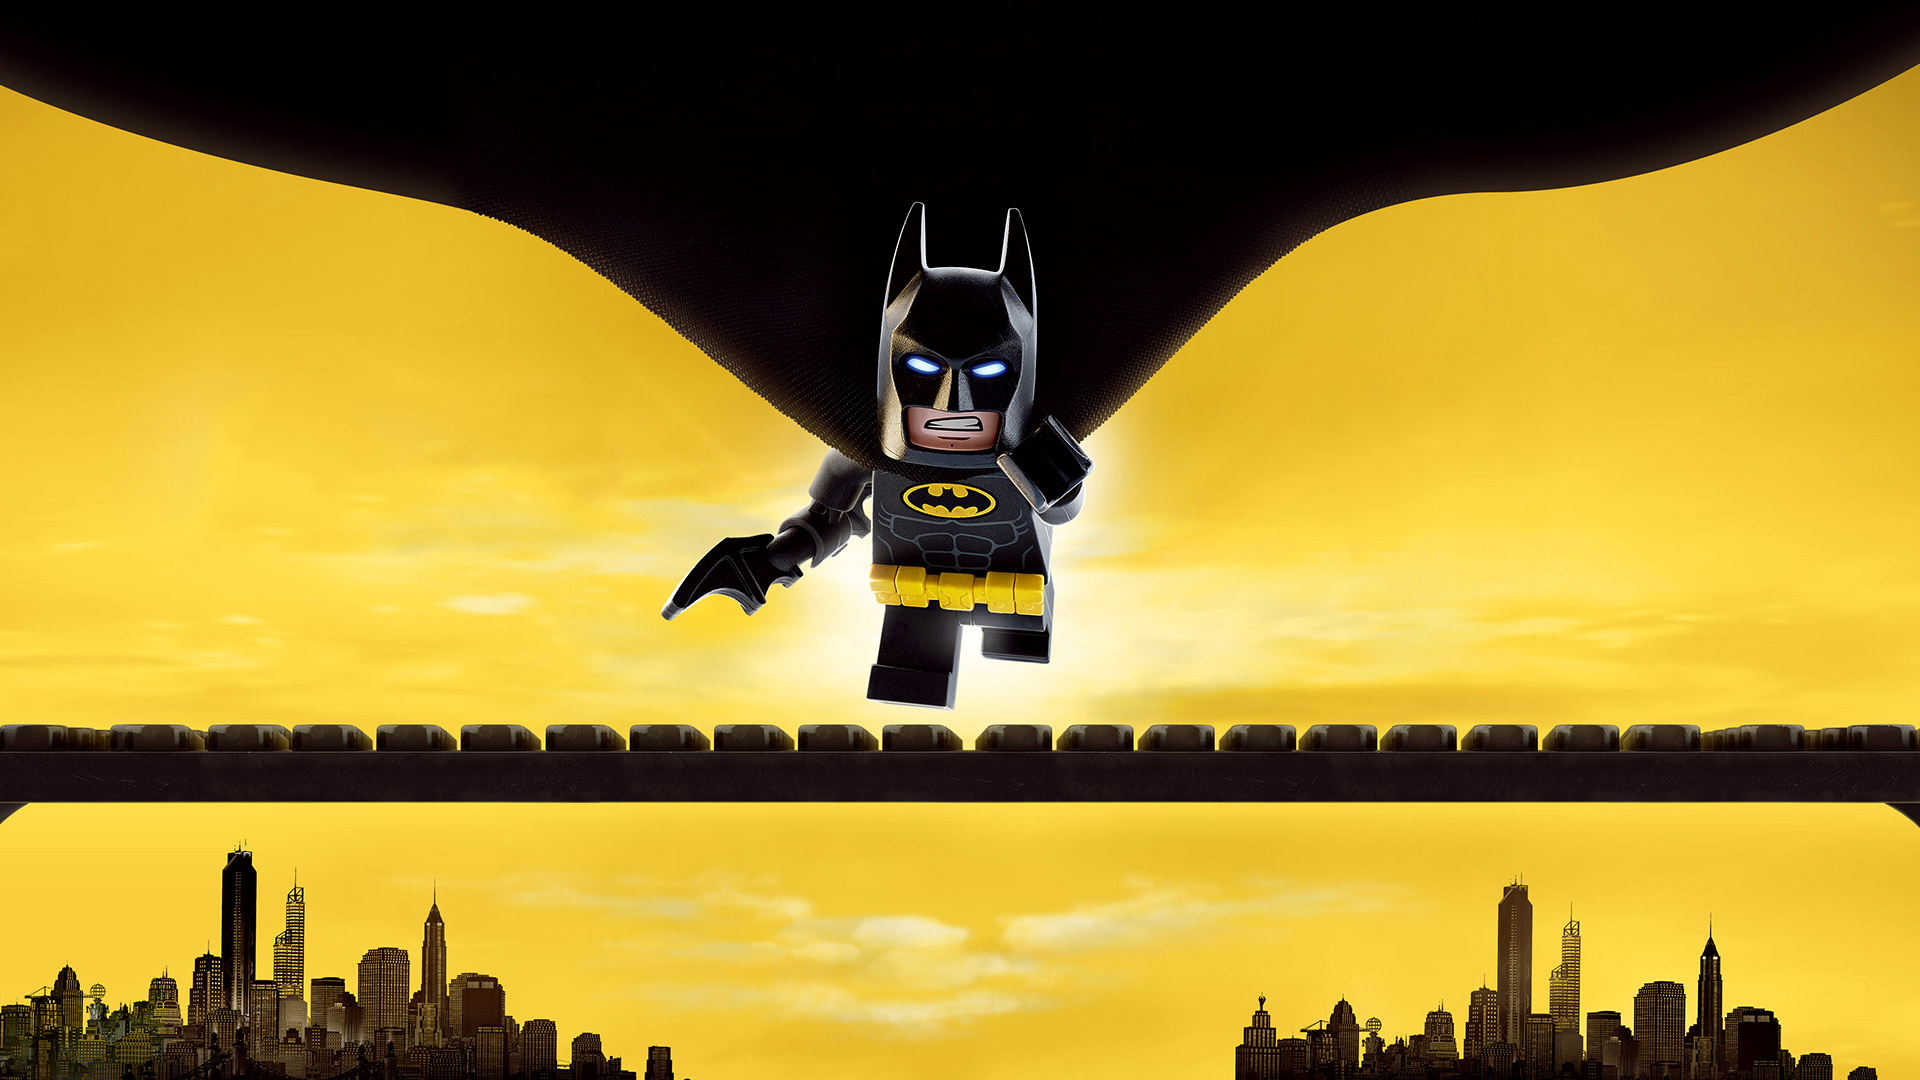 Lego Batman, HD wallpapers, Visual backgrounds, Fun for all ages, 1920x1080 Full HD Desktop